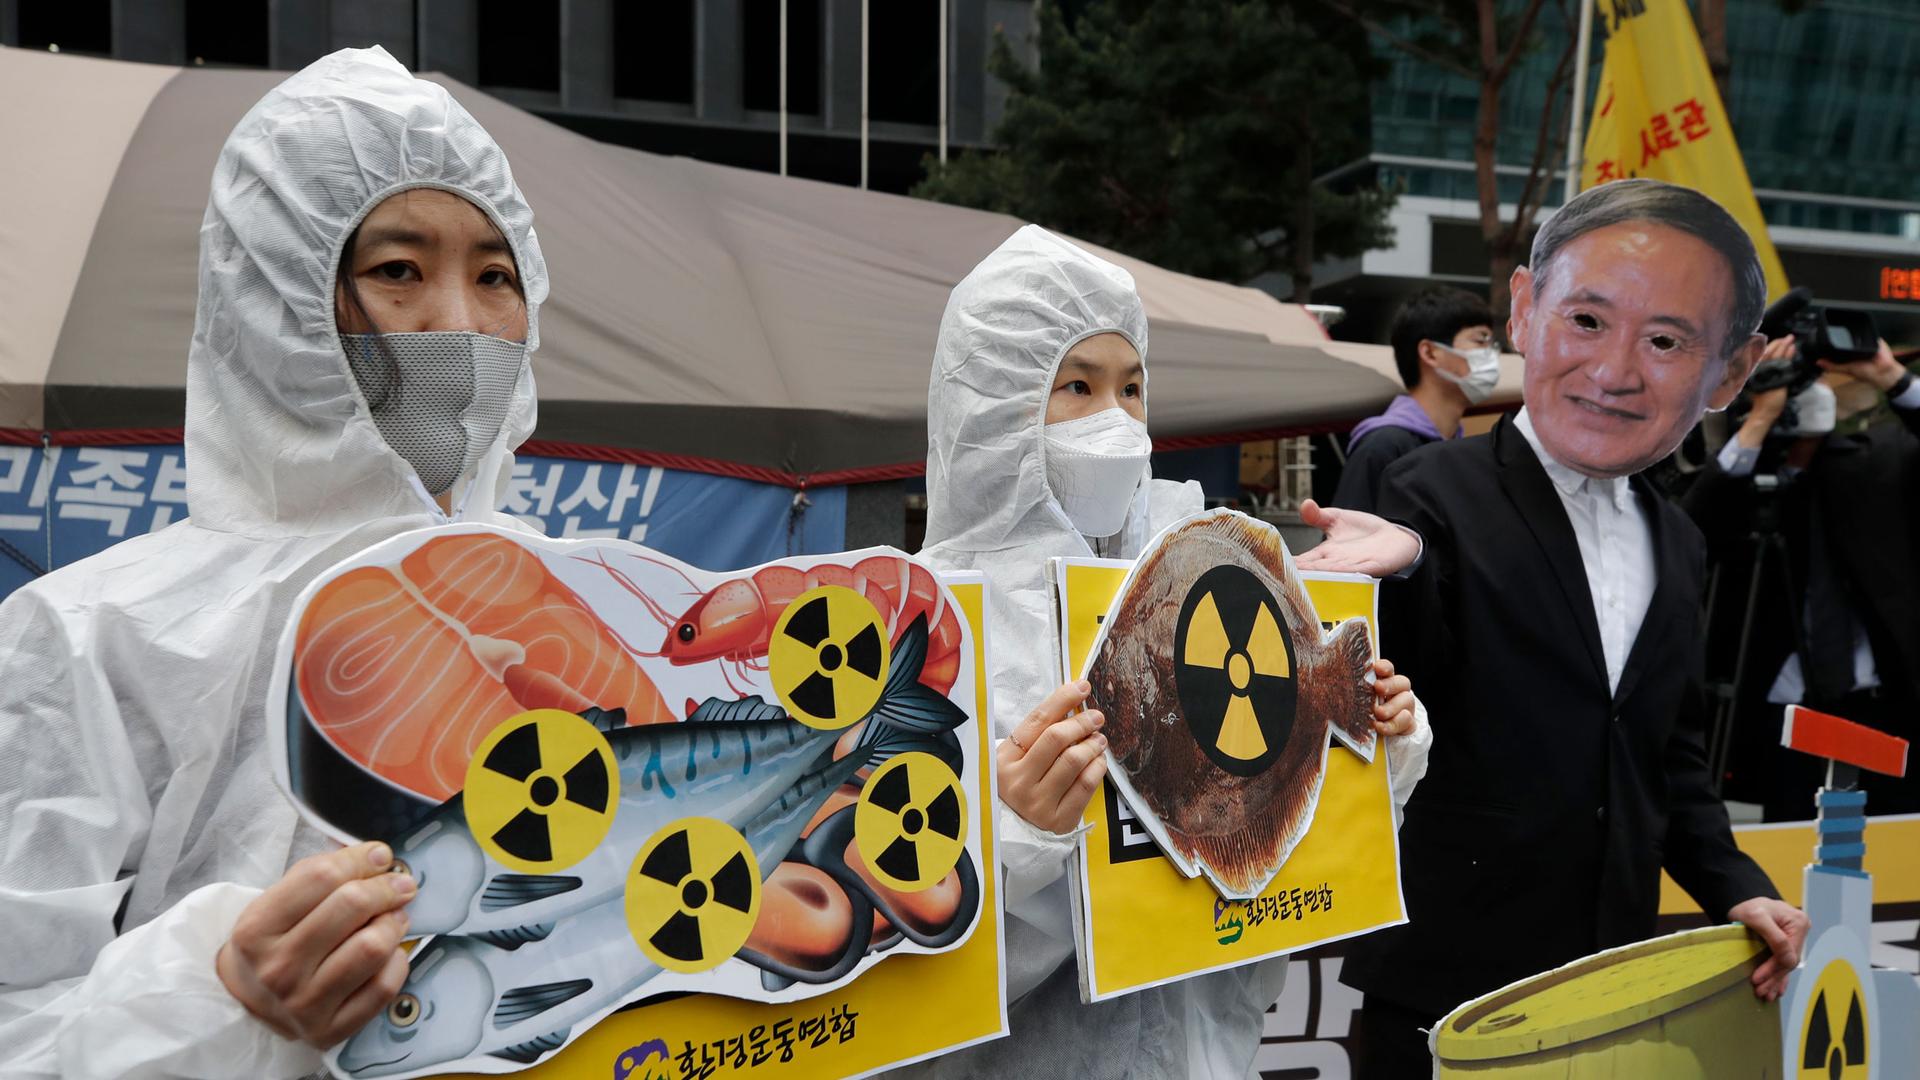 A protester is shown wearing a white radiation protection suit and holding a sign with cuts of fish and the radioactive symbol.